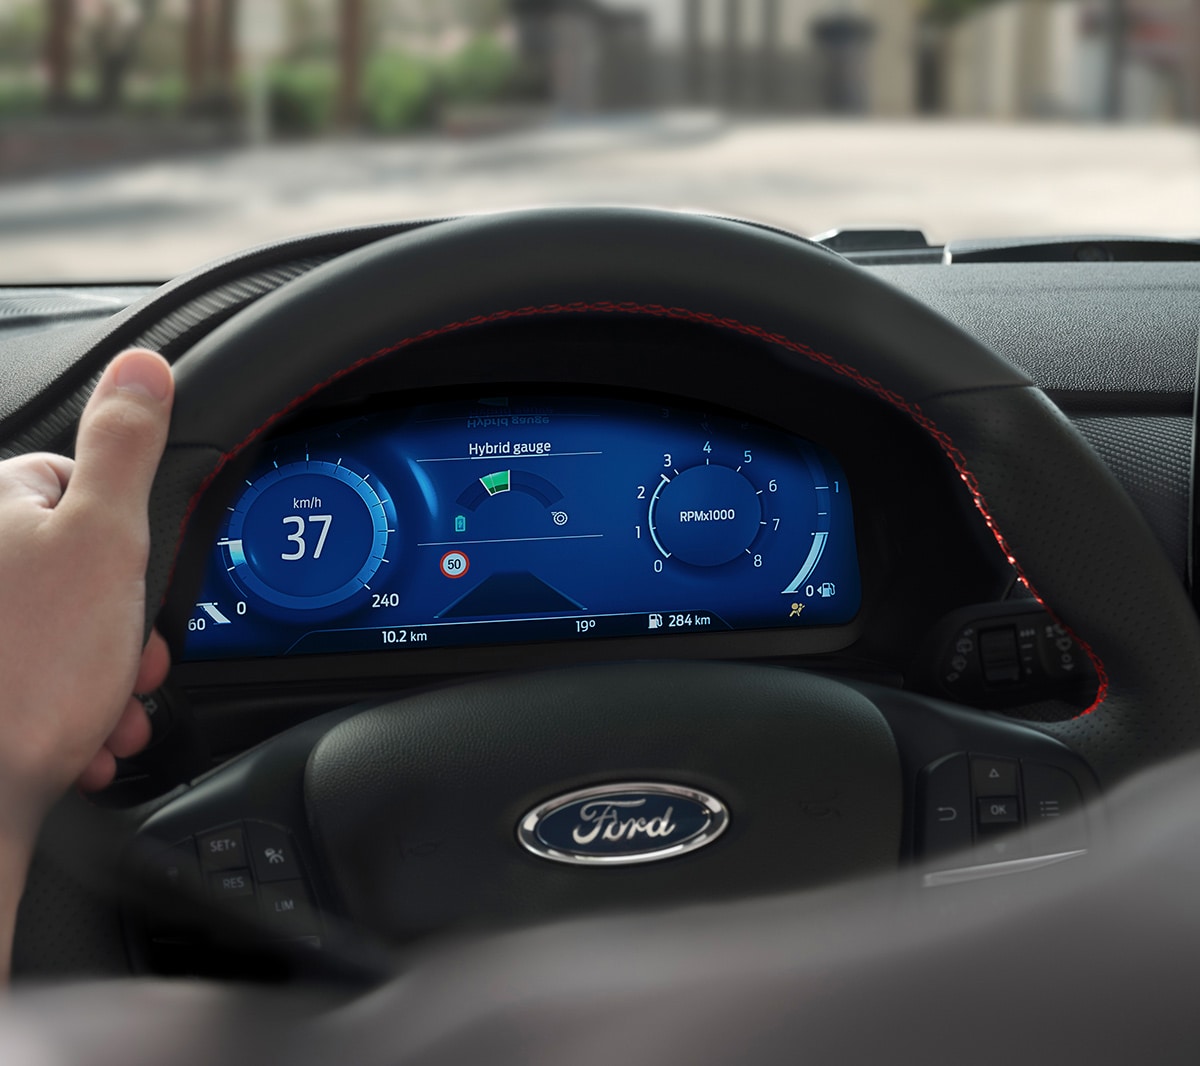 Ford Fiesta displaying selectable drive modes